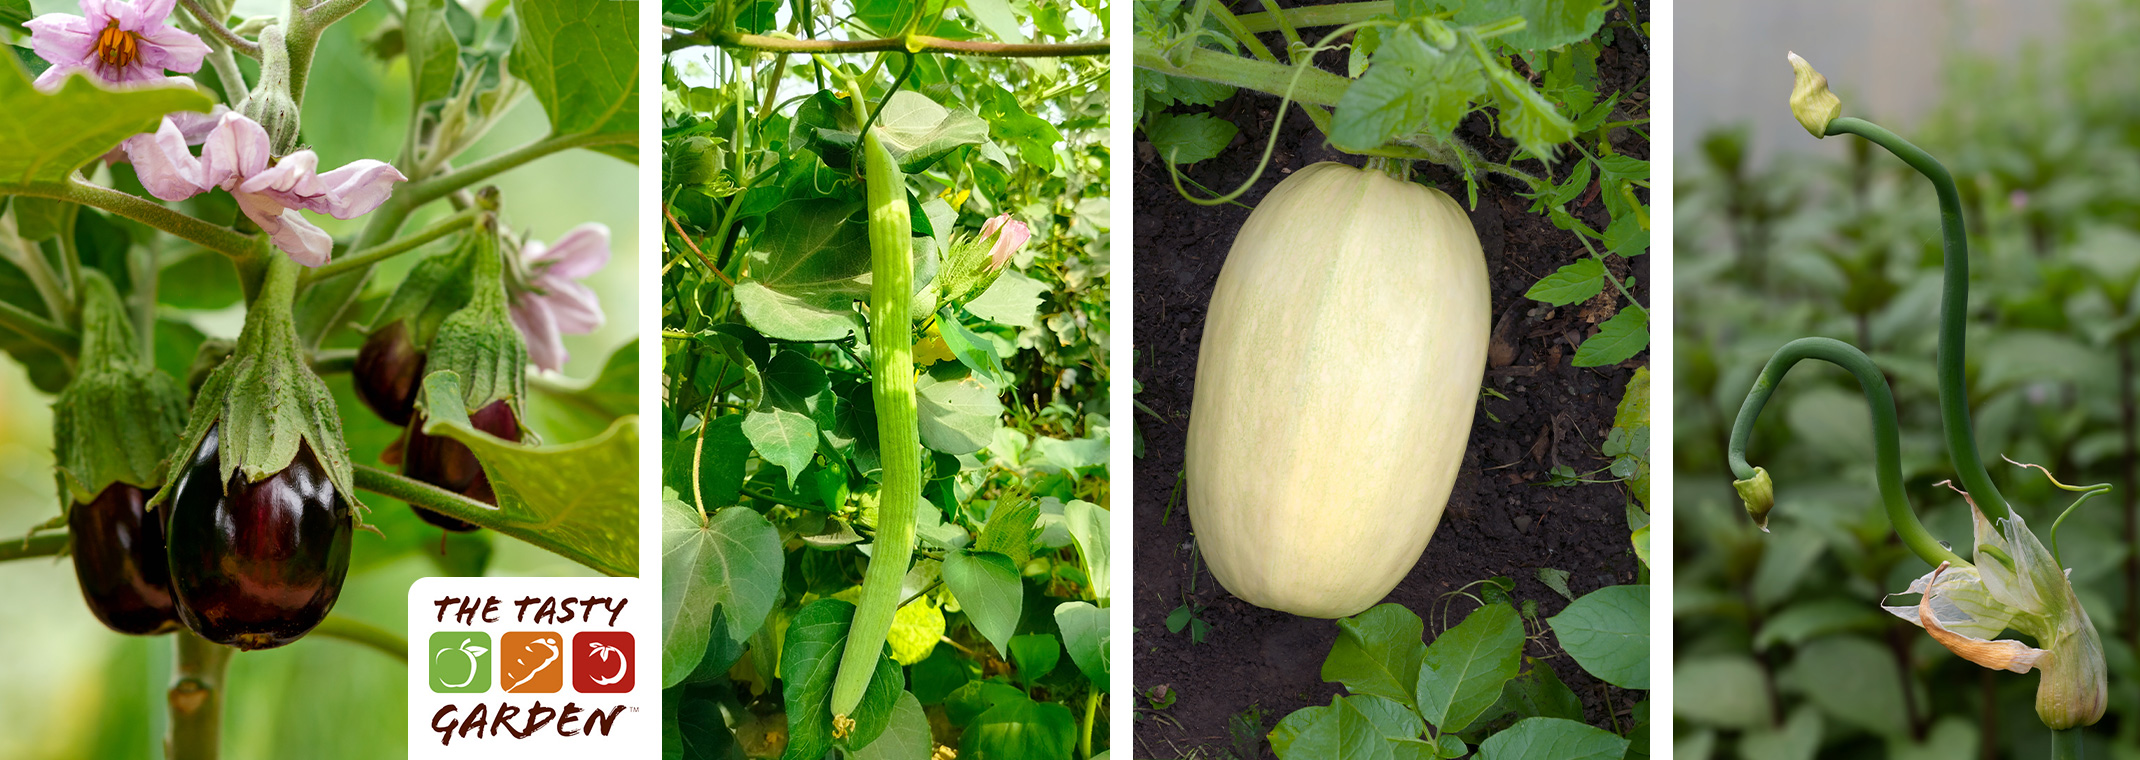 Summer varieties of an eggplant, cucumber, squash and onions.